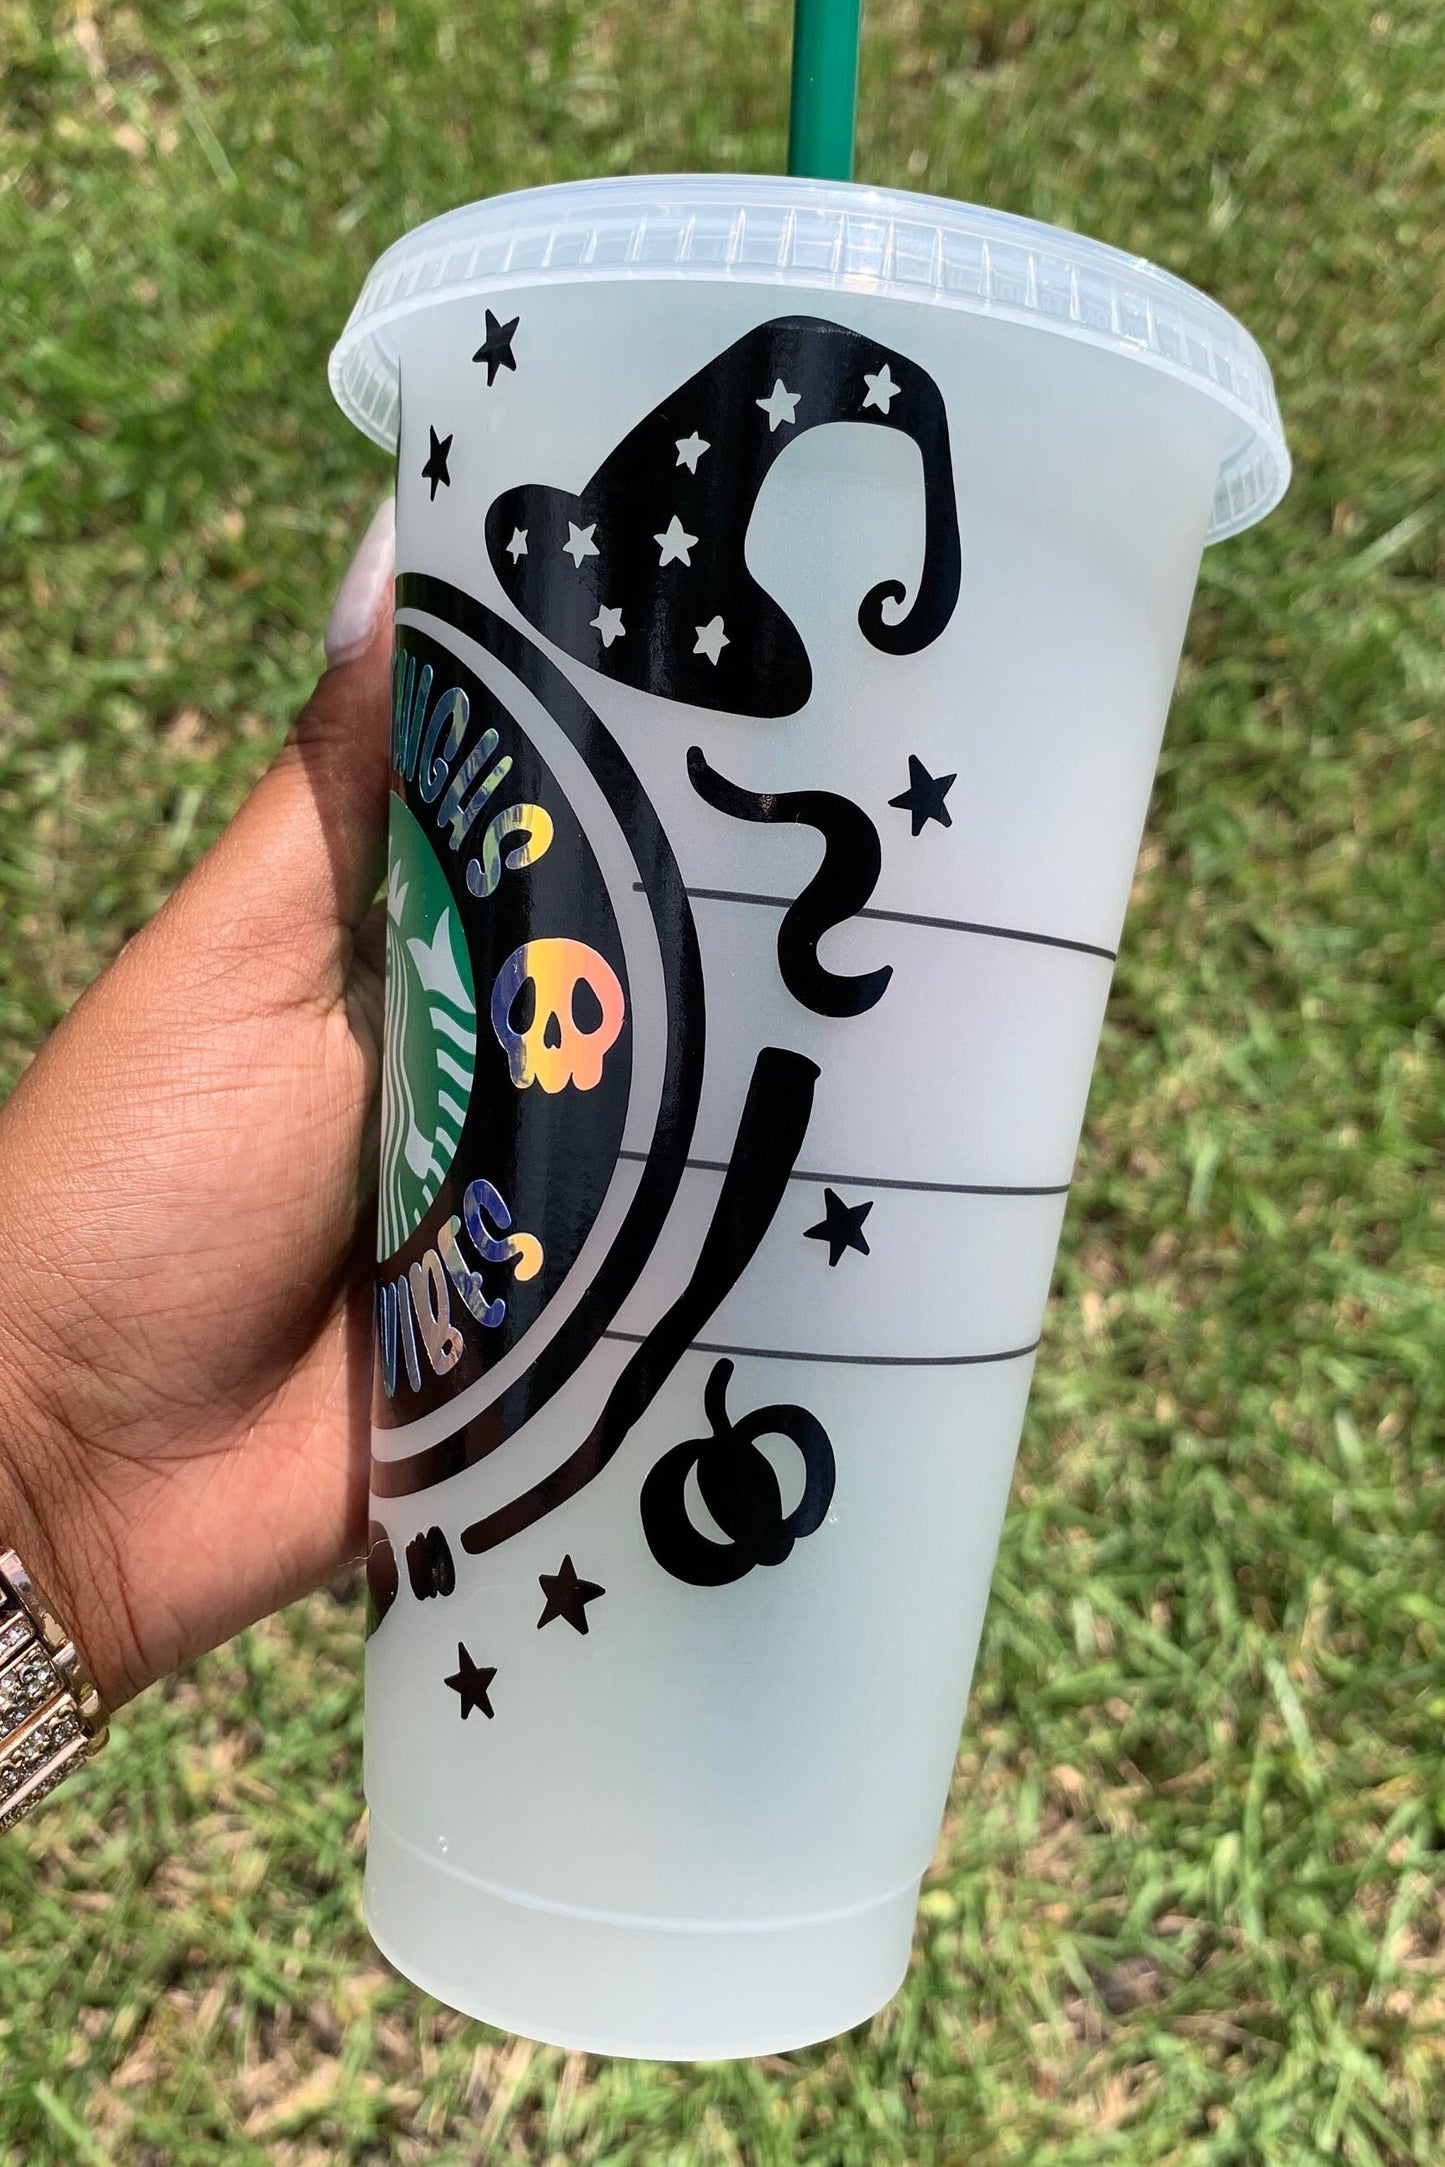 Personalized Thick Thighs and Witchy Vibes 24 oz cold cup